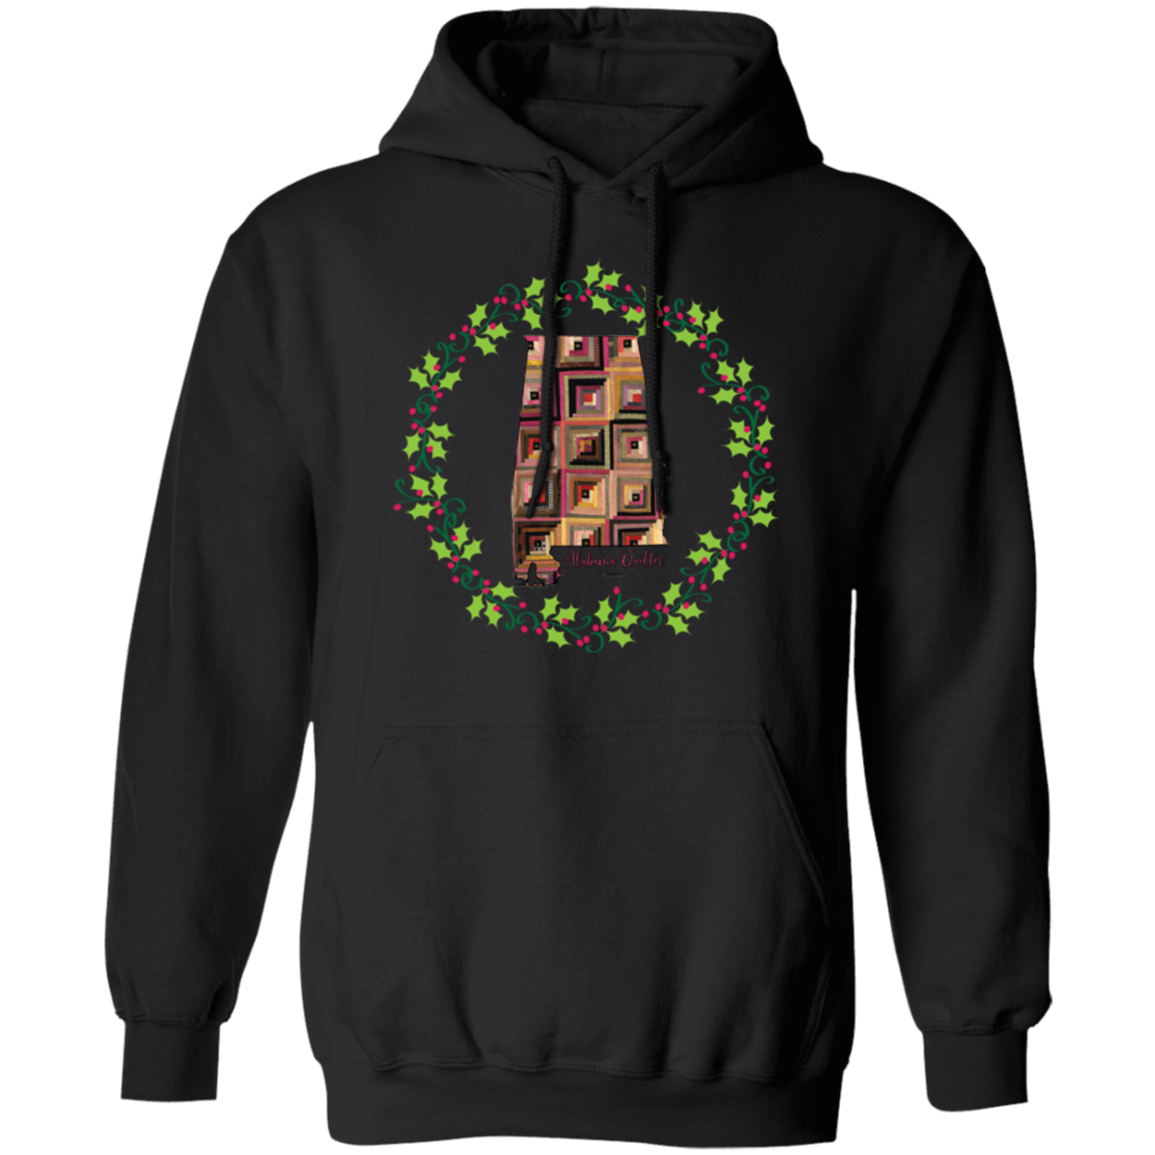 Alabama Quilter Christmas Pullover Hoodie